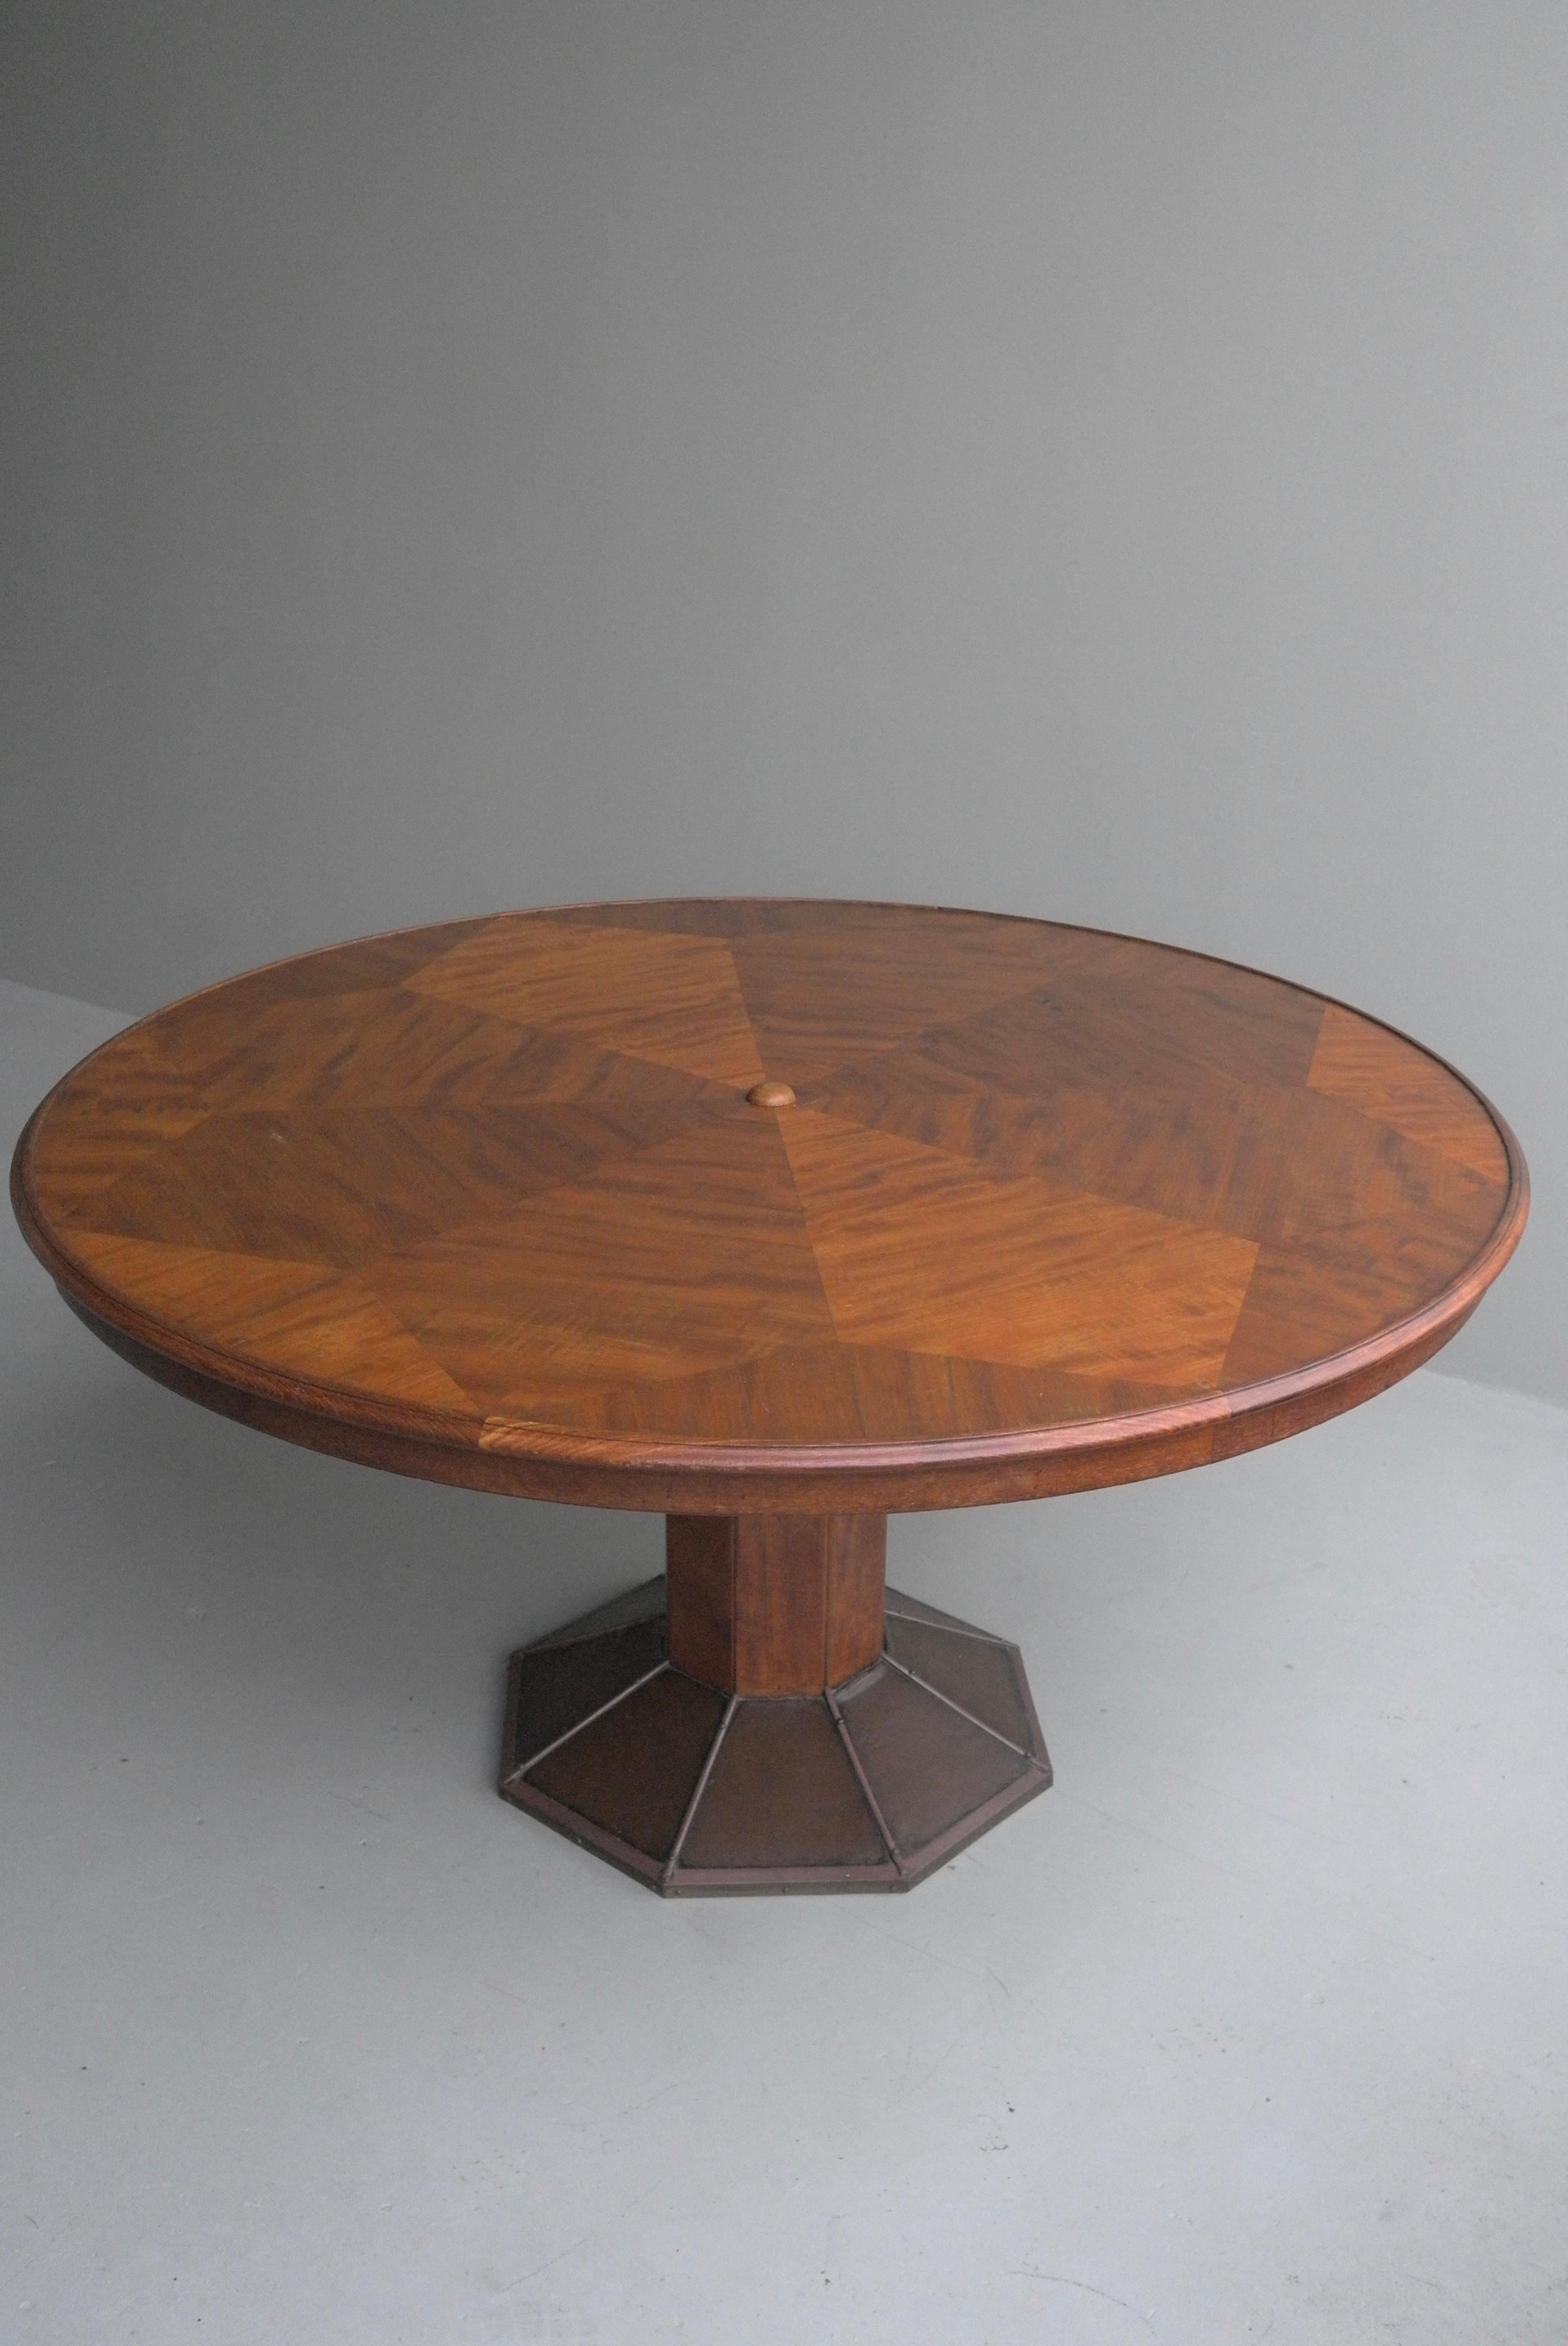 Large Round Sculptural Wooden Art Deco Dining Table by H.Pander & Zonen For Sale 2